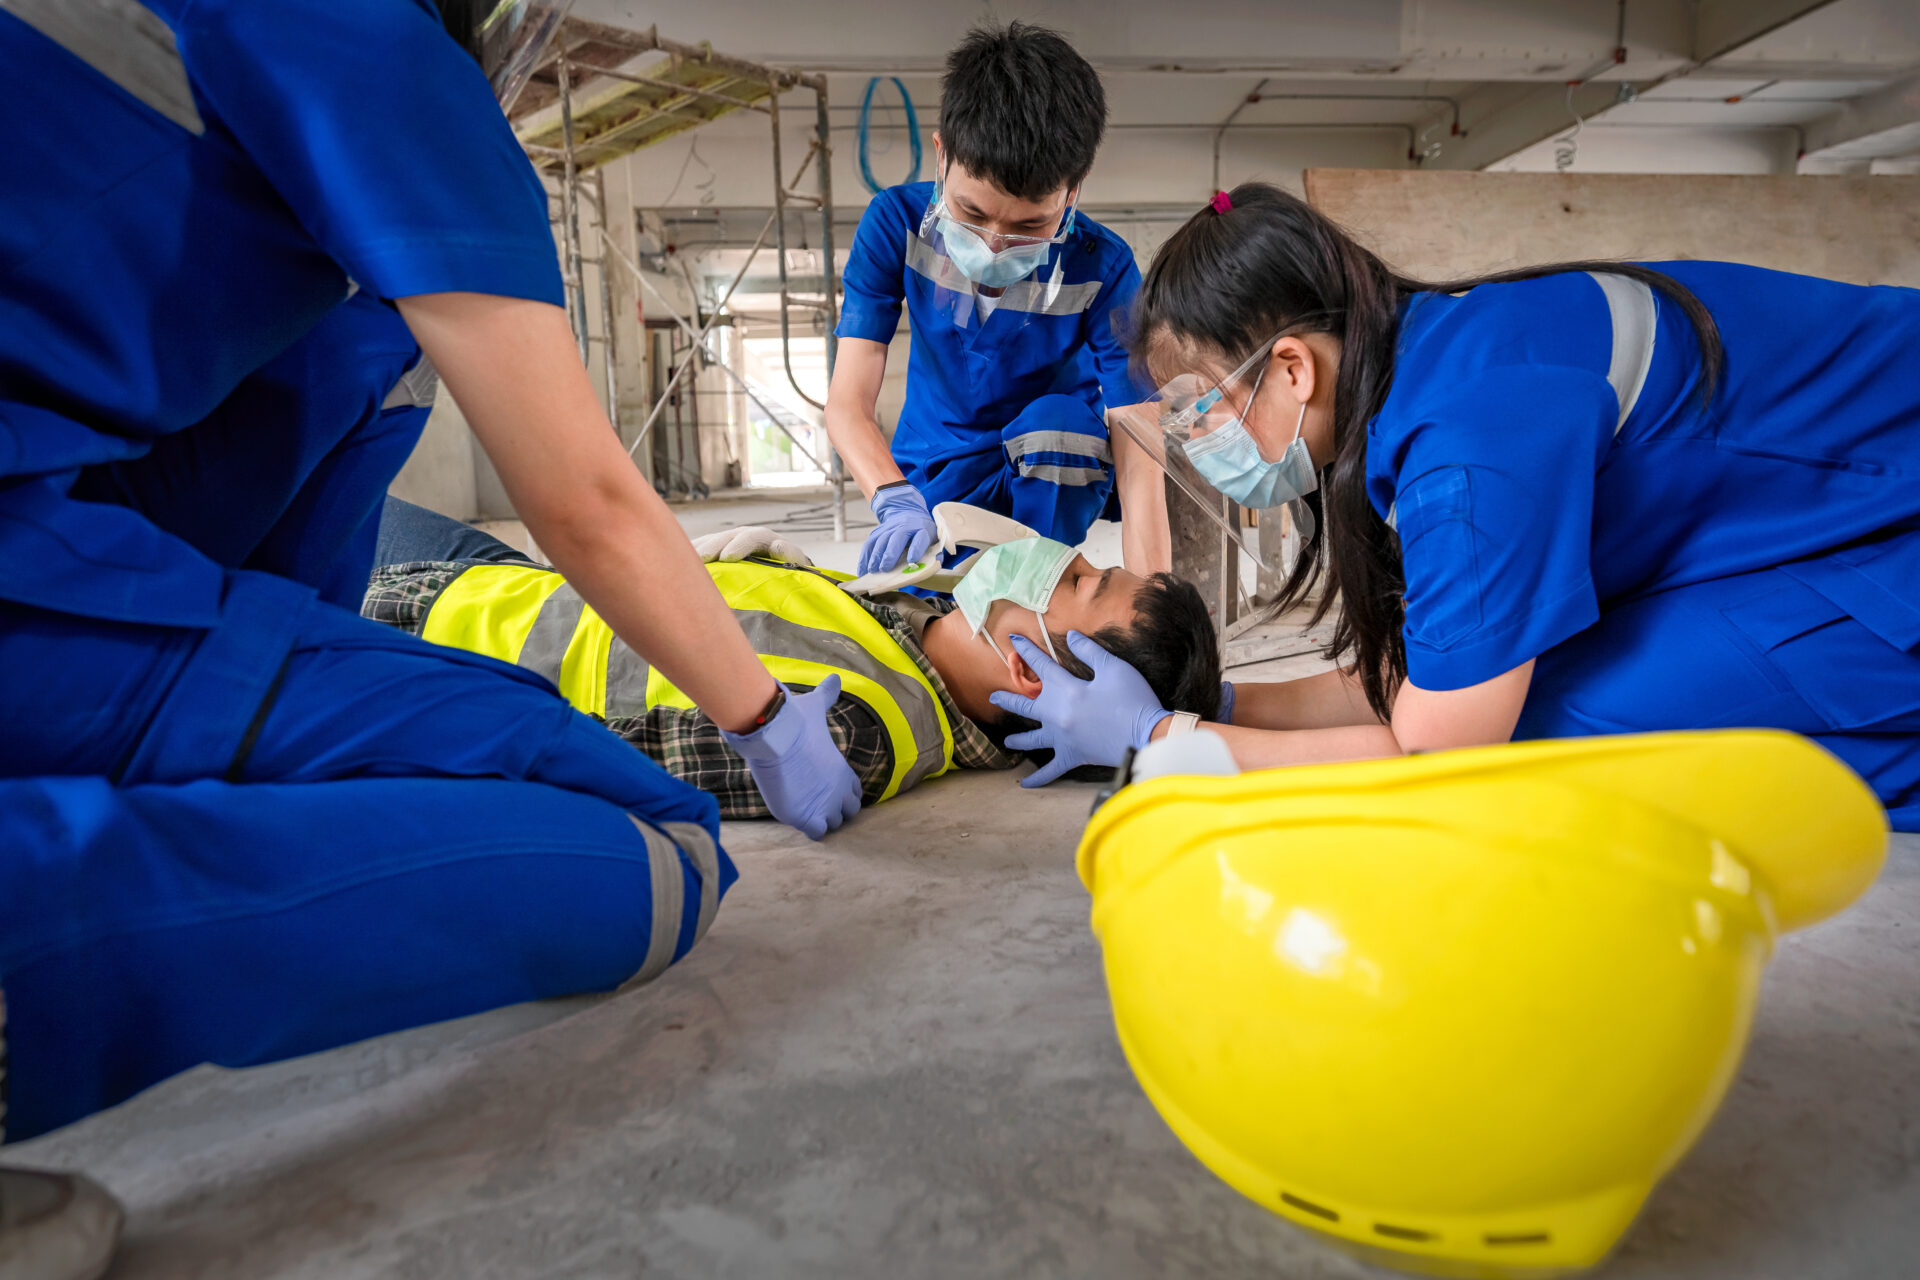 First aid for head injuries and Considered for all trauma incidents of worker in work. First aid training to transfer patient, loss of feeling or loss of normal movement.